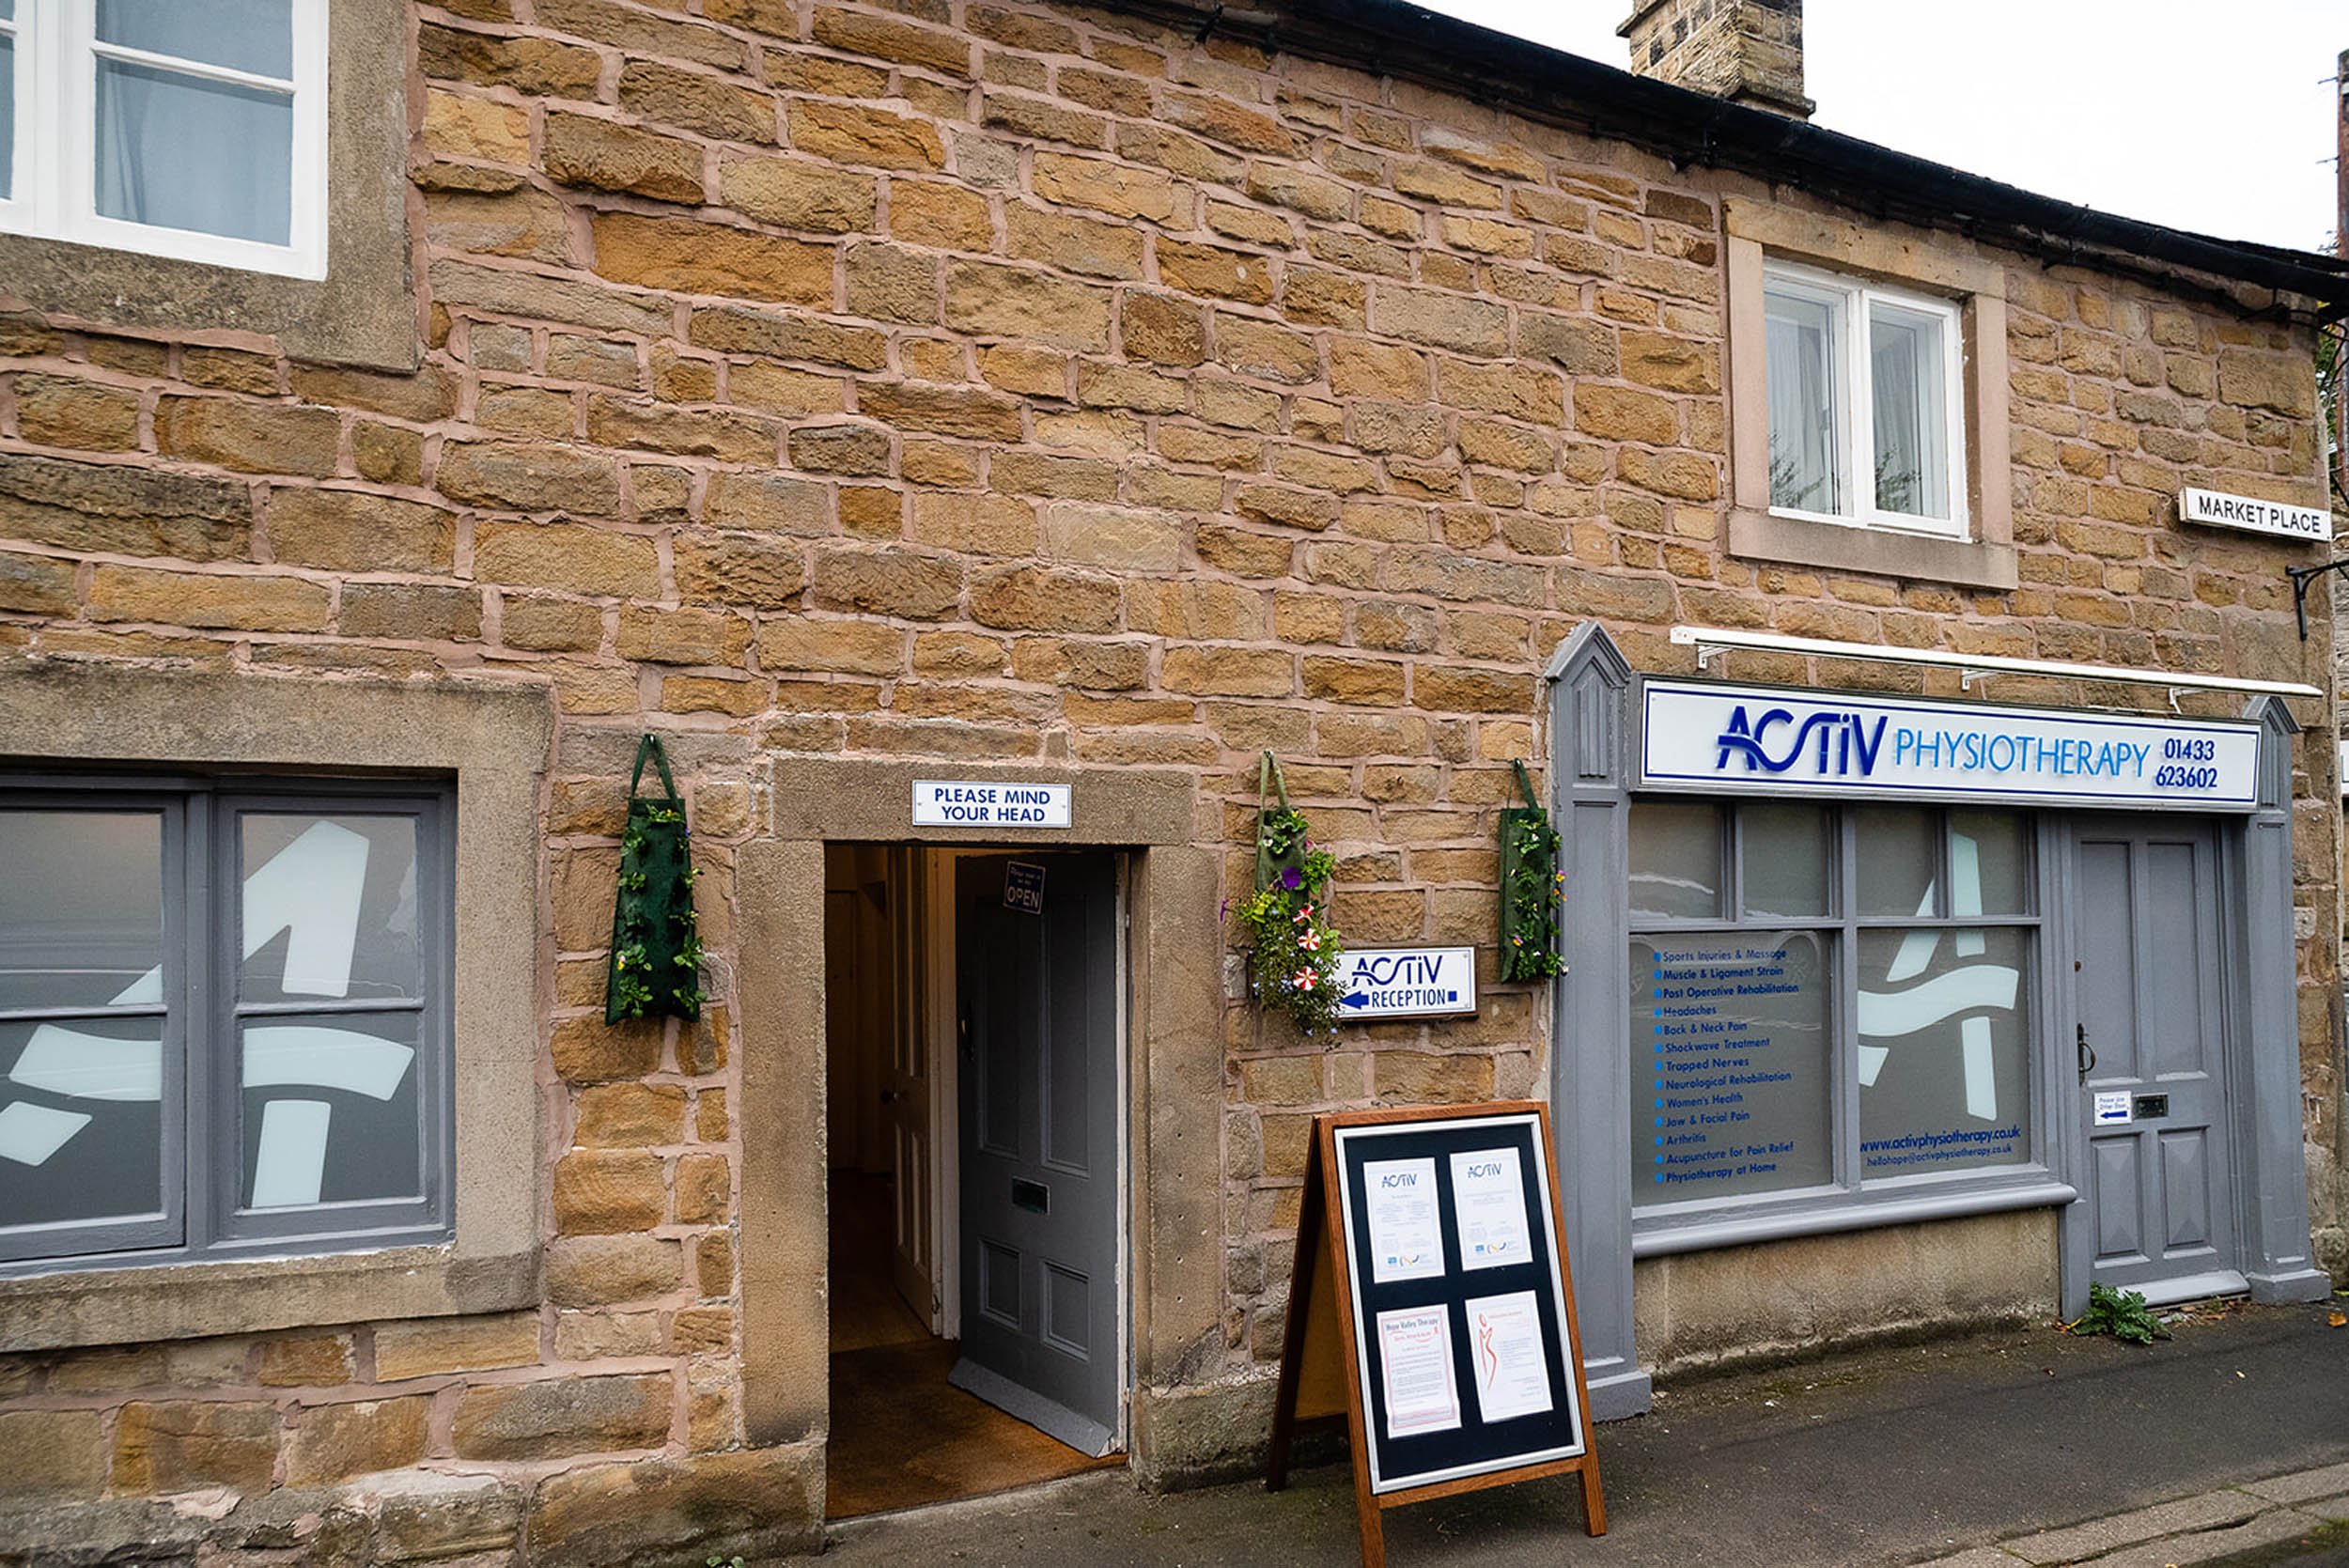 Activ Physiotherapy clinic in Hope, Derbyshire